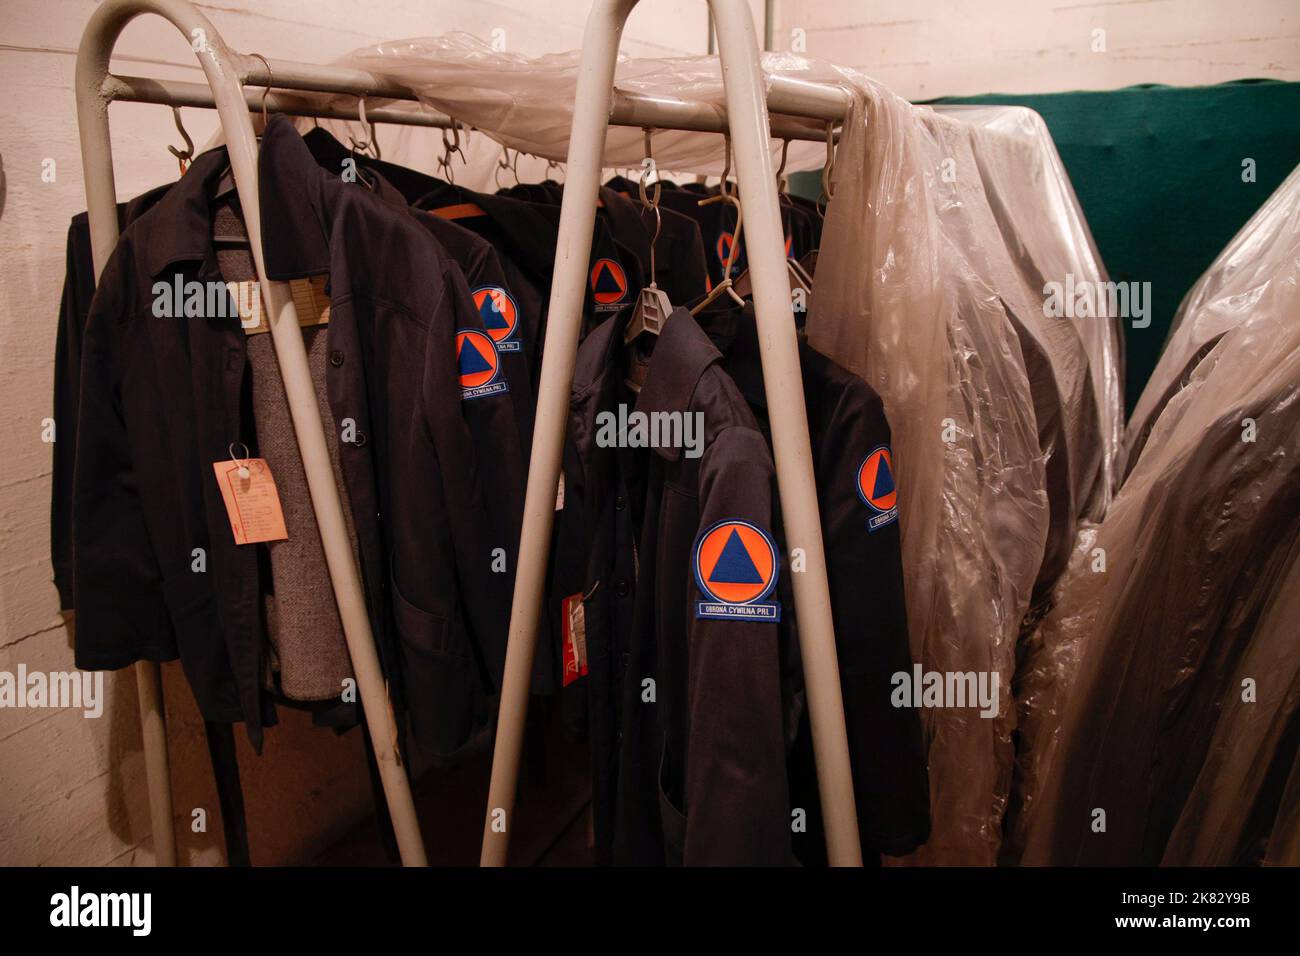 Uniforms of the Soviet era Civial Defence Forces (Obrona Cywilna PRL) are seen in a disused bomb shelter in Warsaw, Poland on 20 October, 2022. Polish Stock Photo